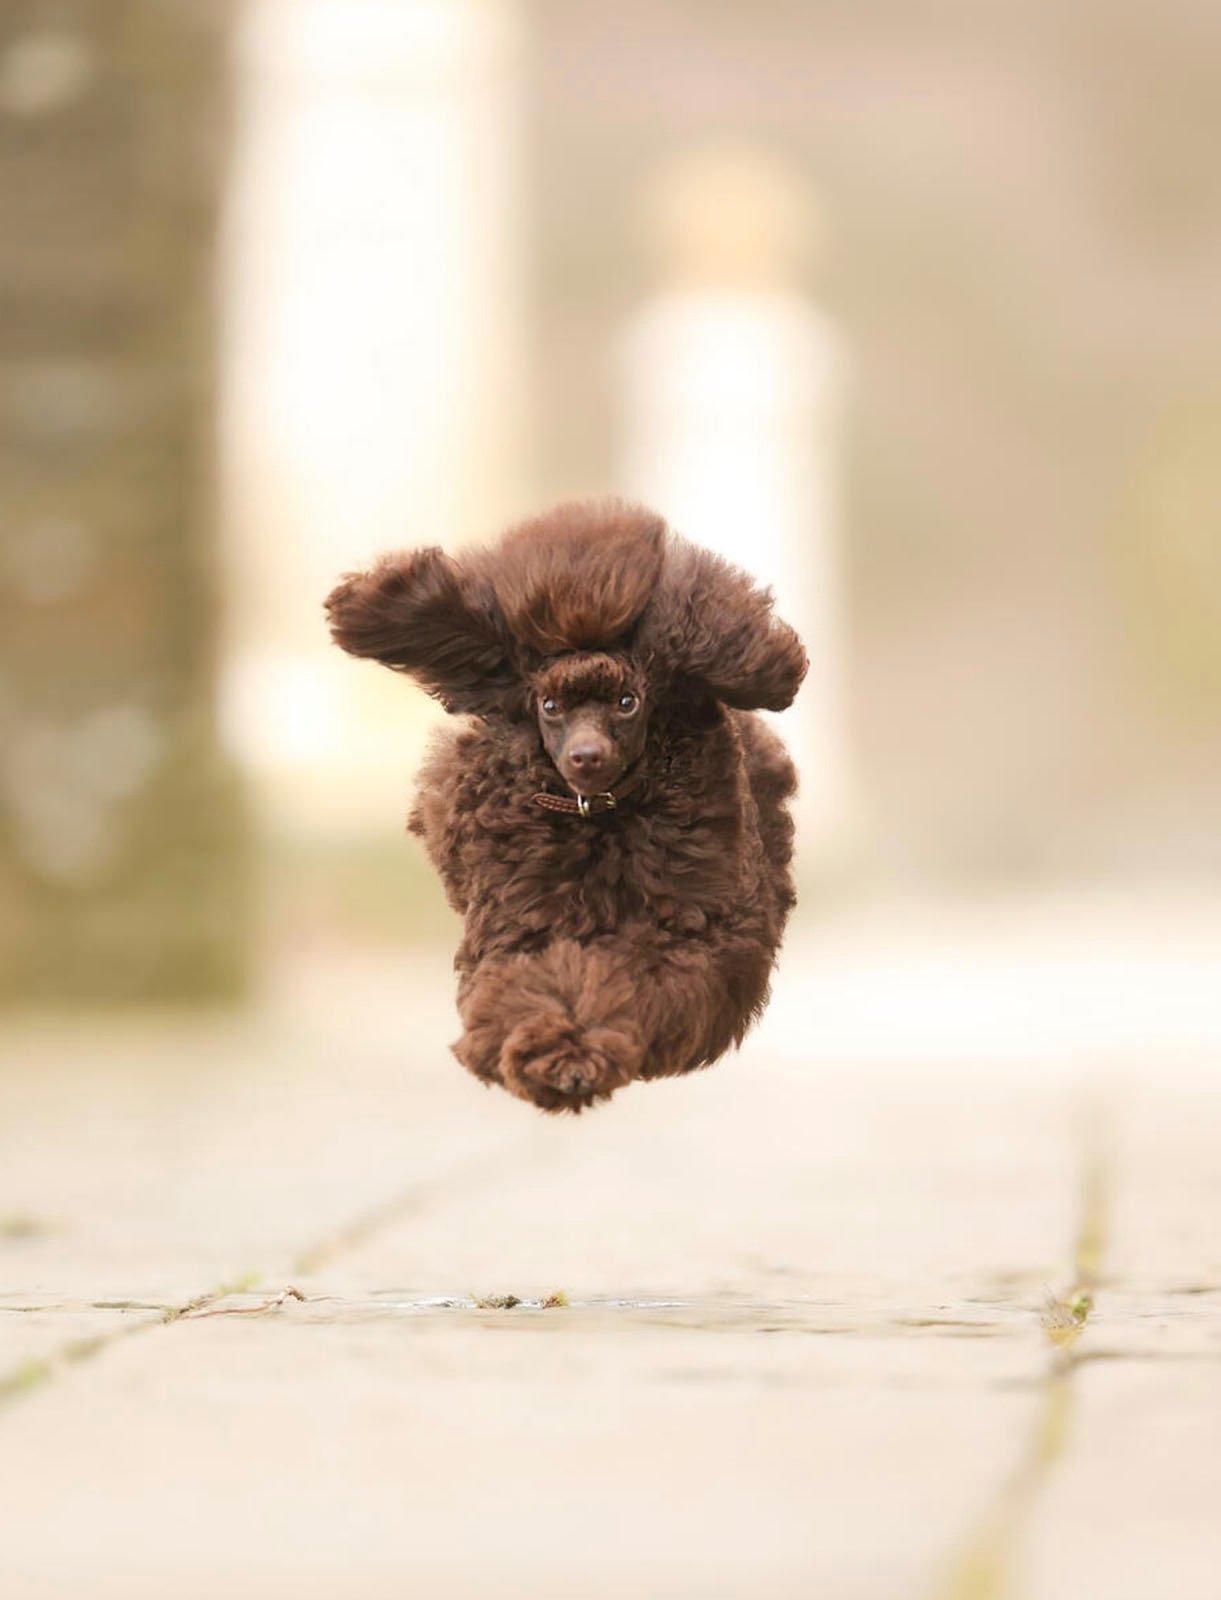 A fluffy brown poodle mid-jump over a sidewalk, with its ears and curly fur bouncing in the air, looking directly at the camera with a focused expression.